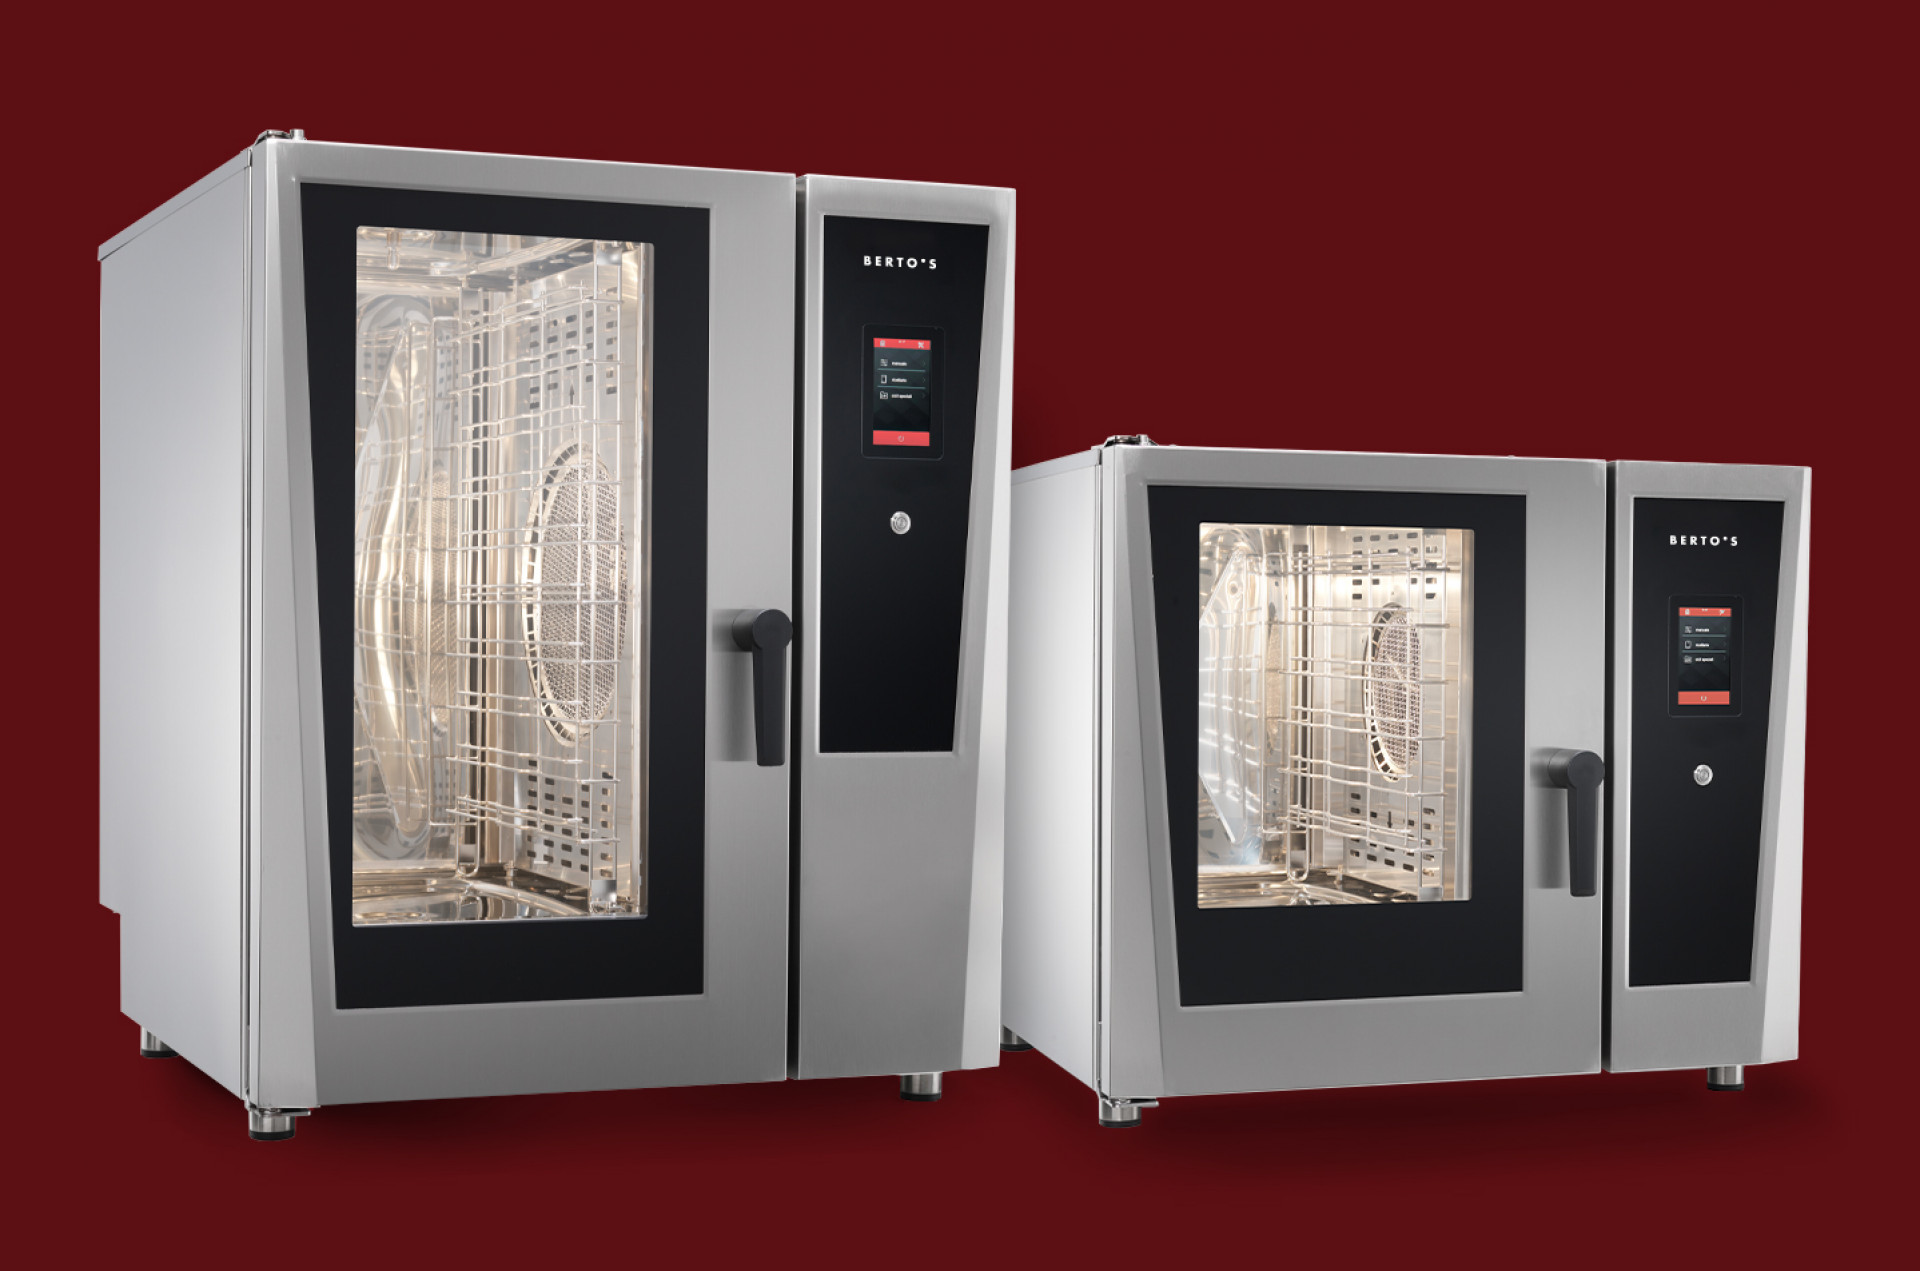 DIRECT INJECTION STEAM OVENS